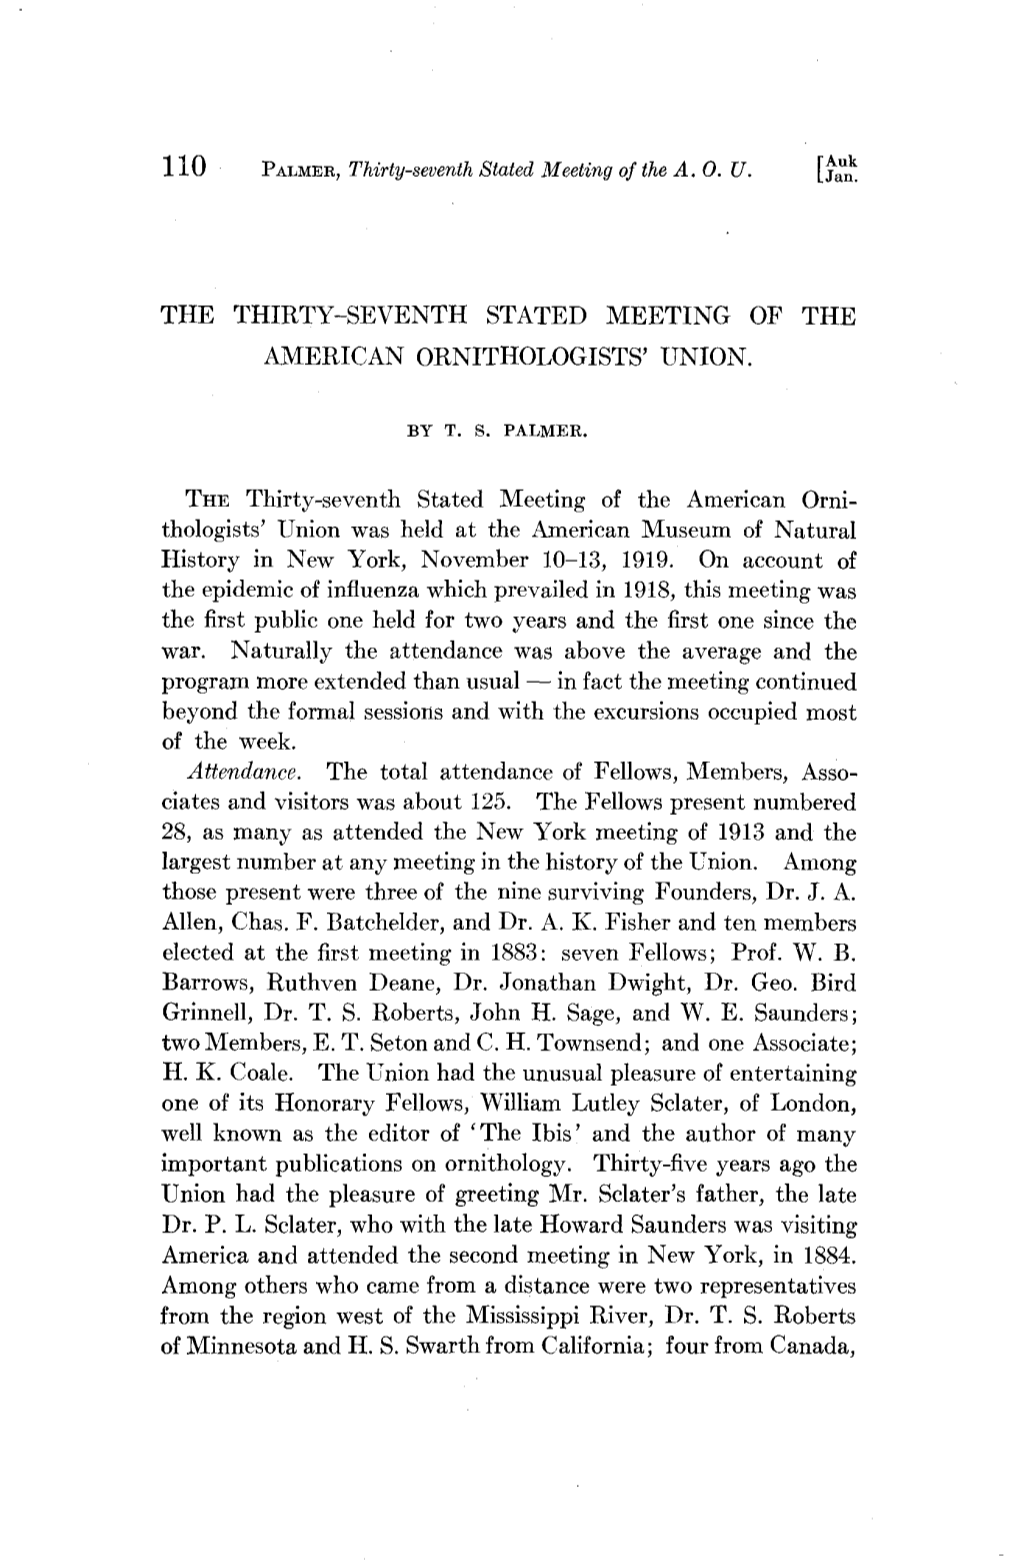 The Thirty-Seventh Stated Meeting of the American Ornithologists' Union